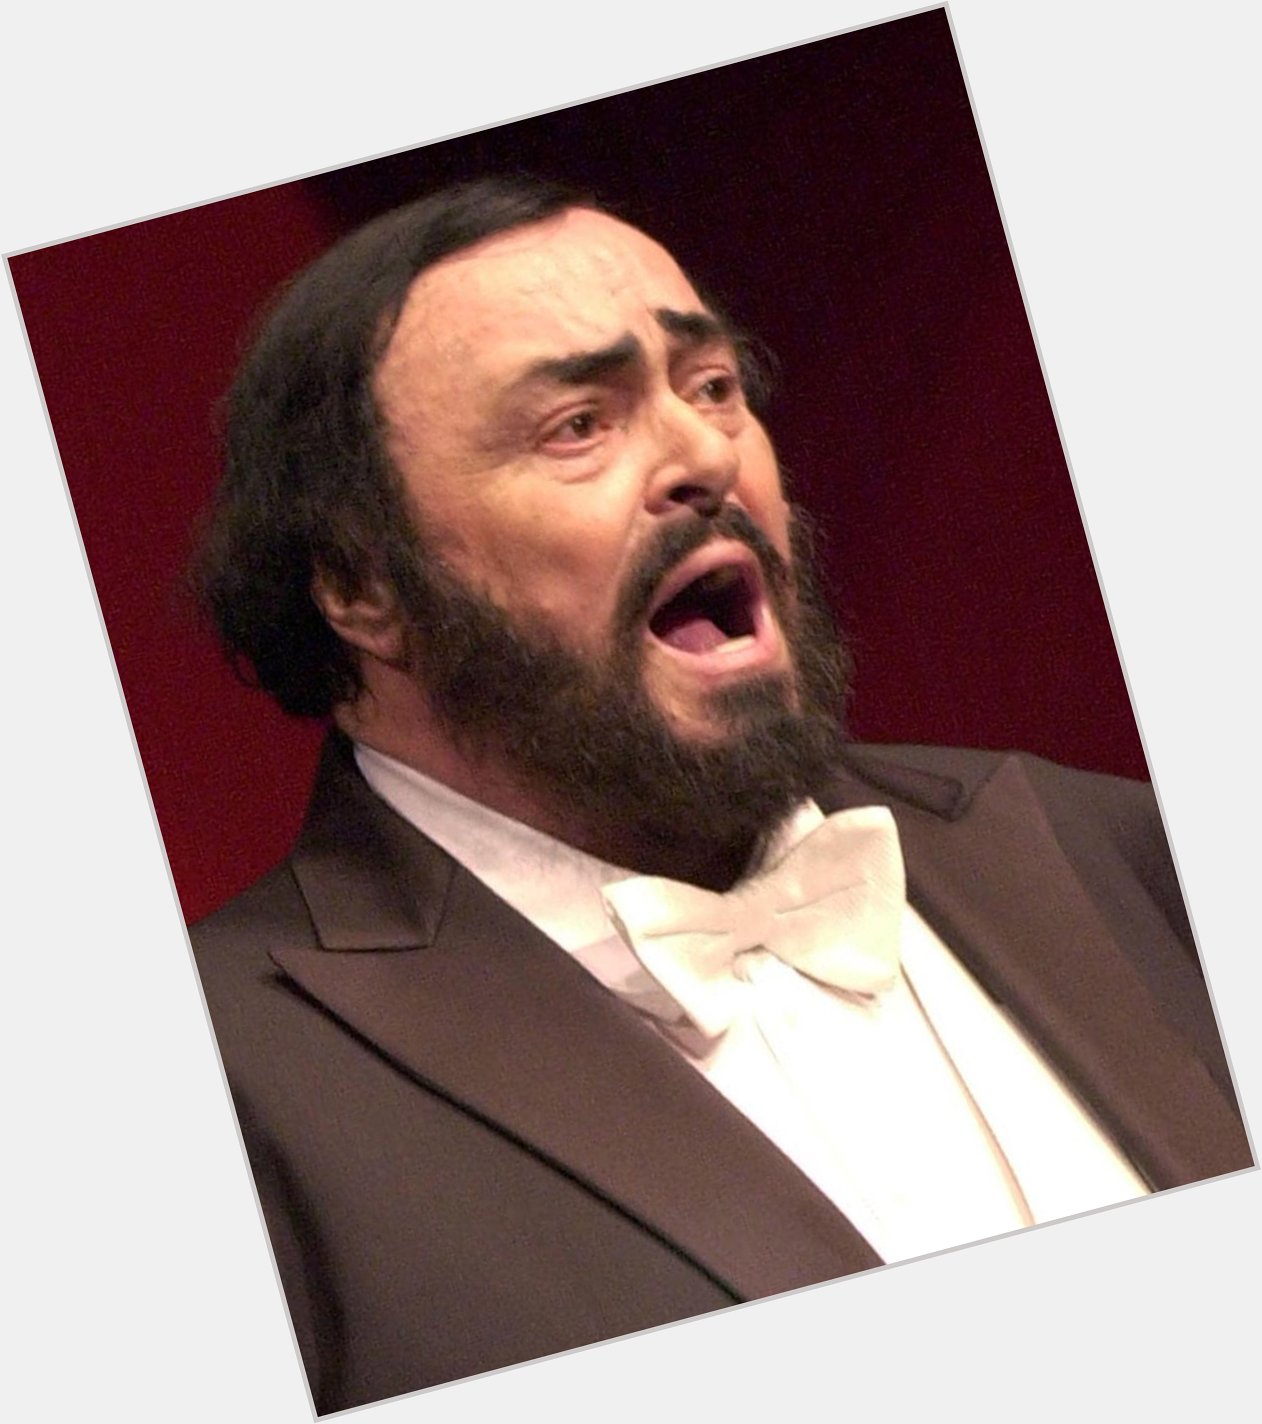  on with wishes Luciano Pavarotti a happy birthday! 